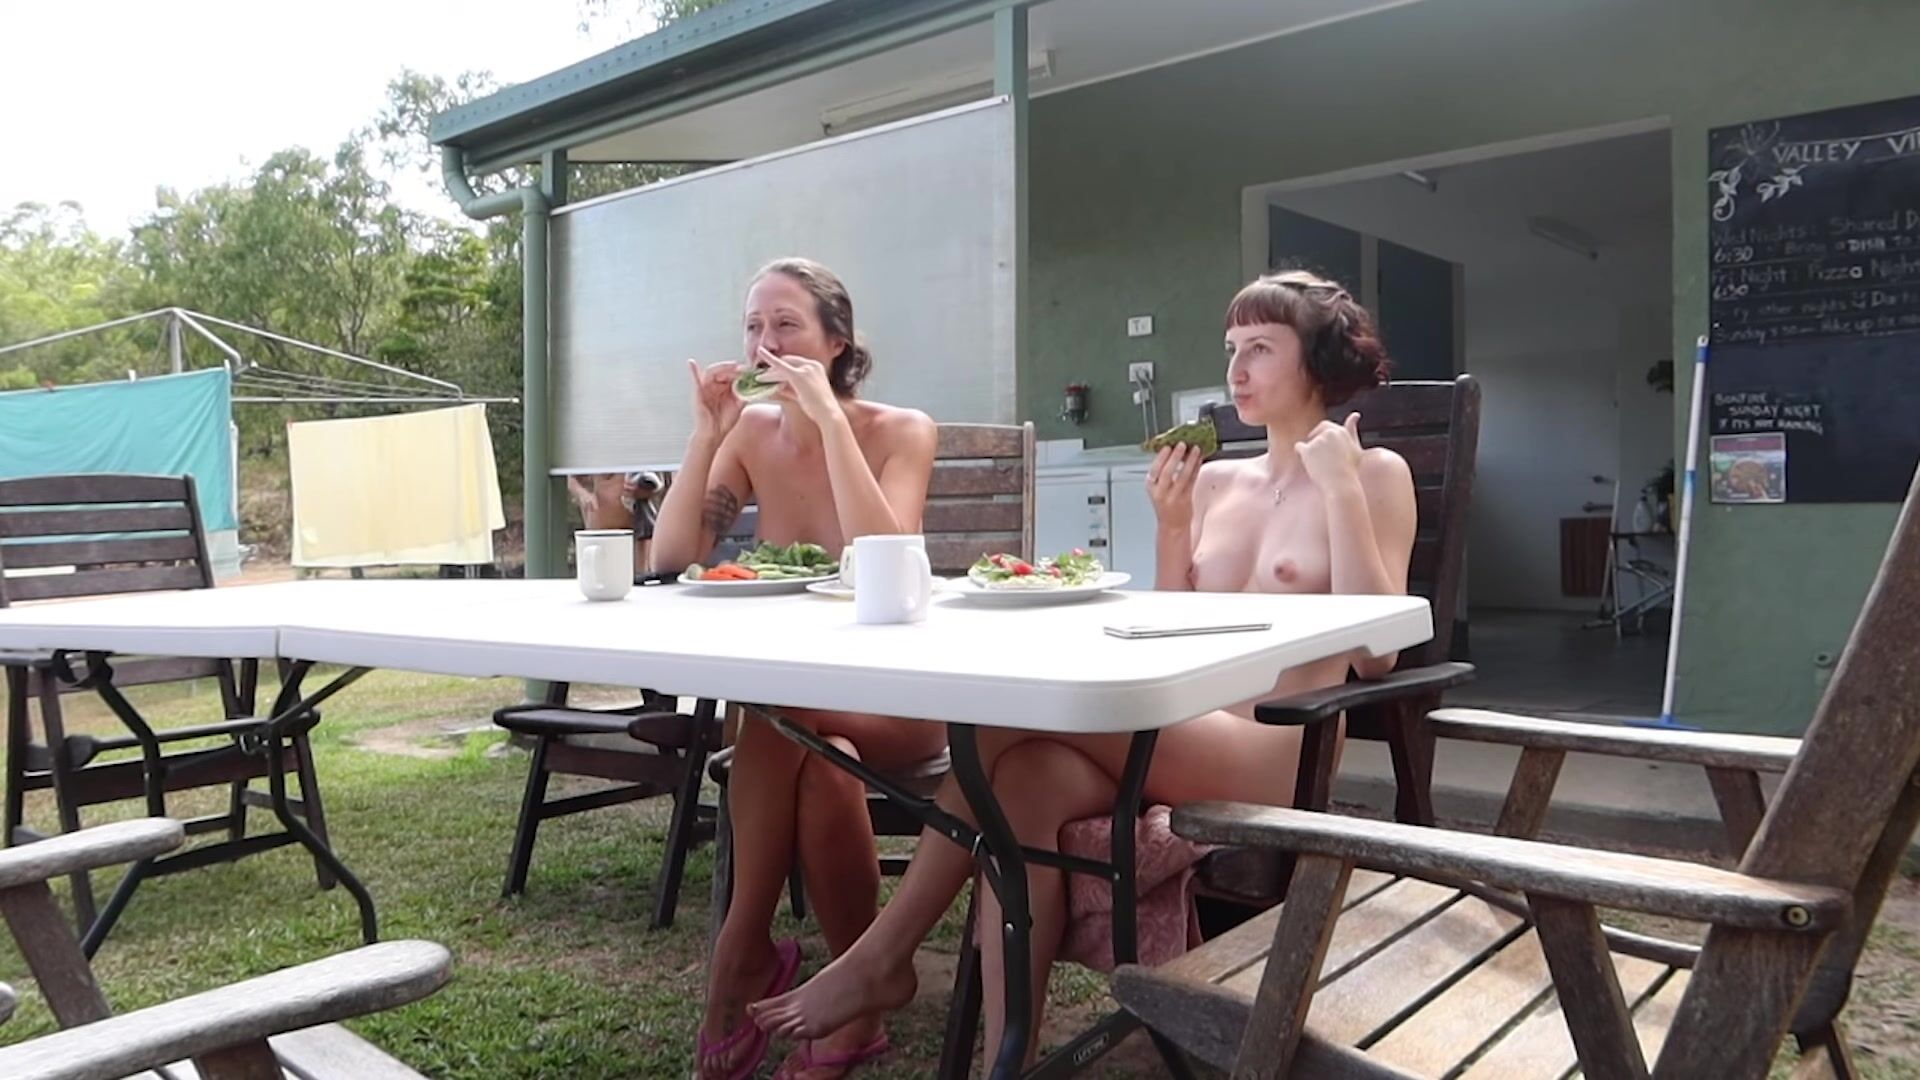 Valley View Naturist Retreat- nude camping in paradise - part 1